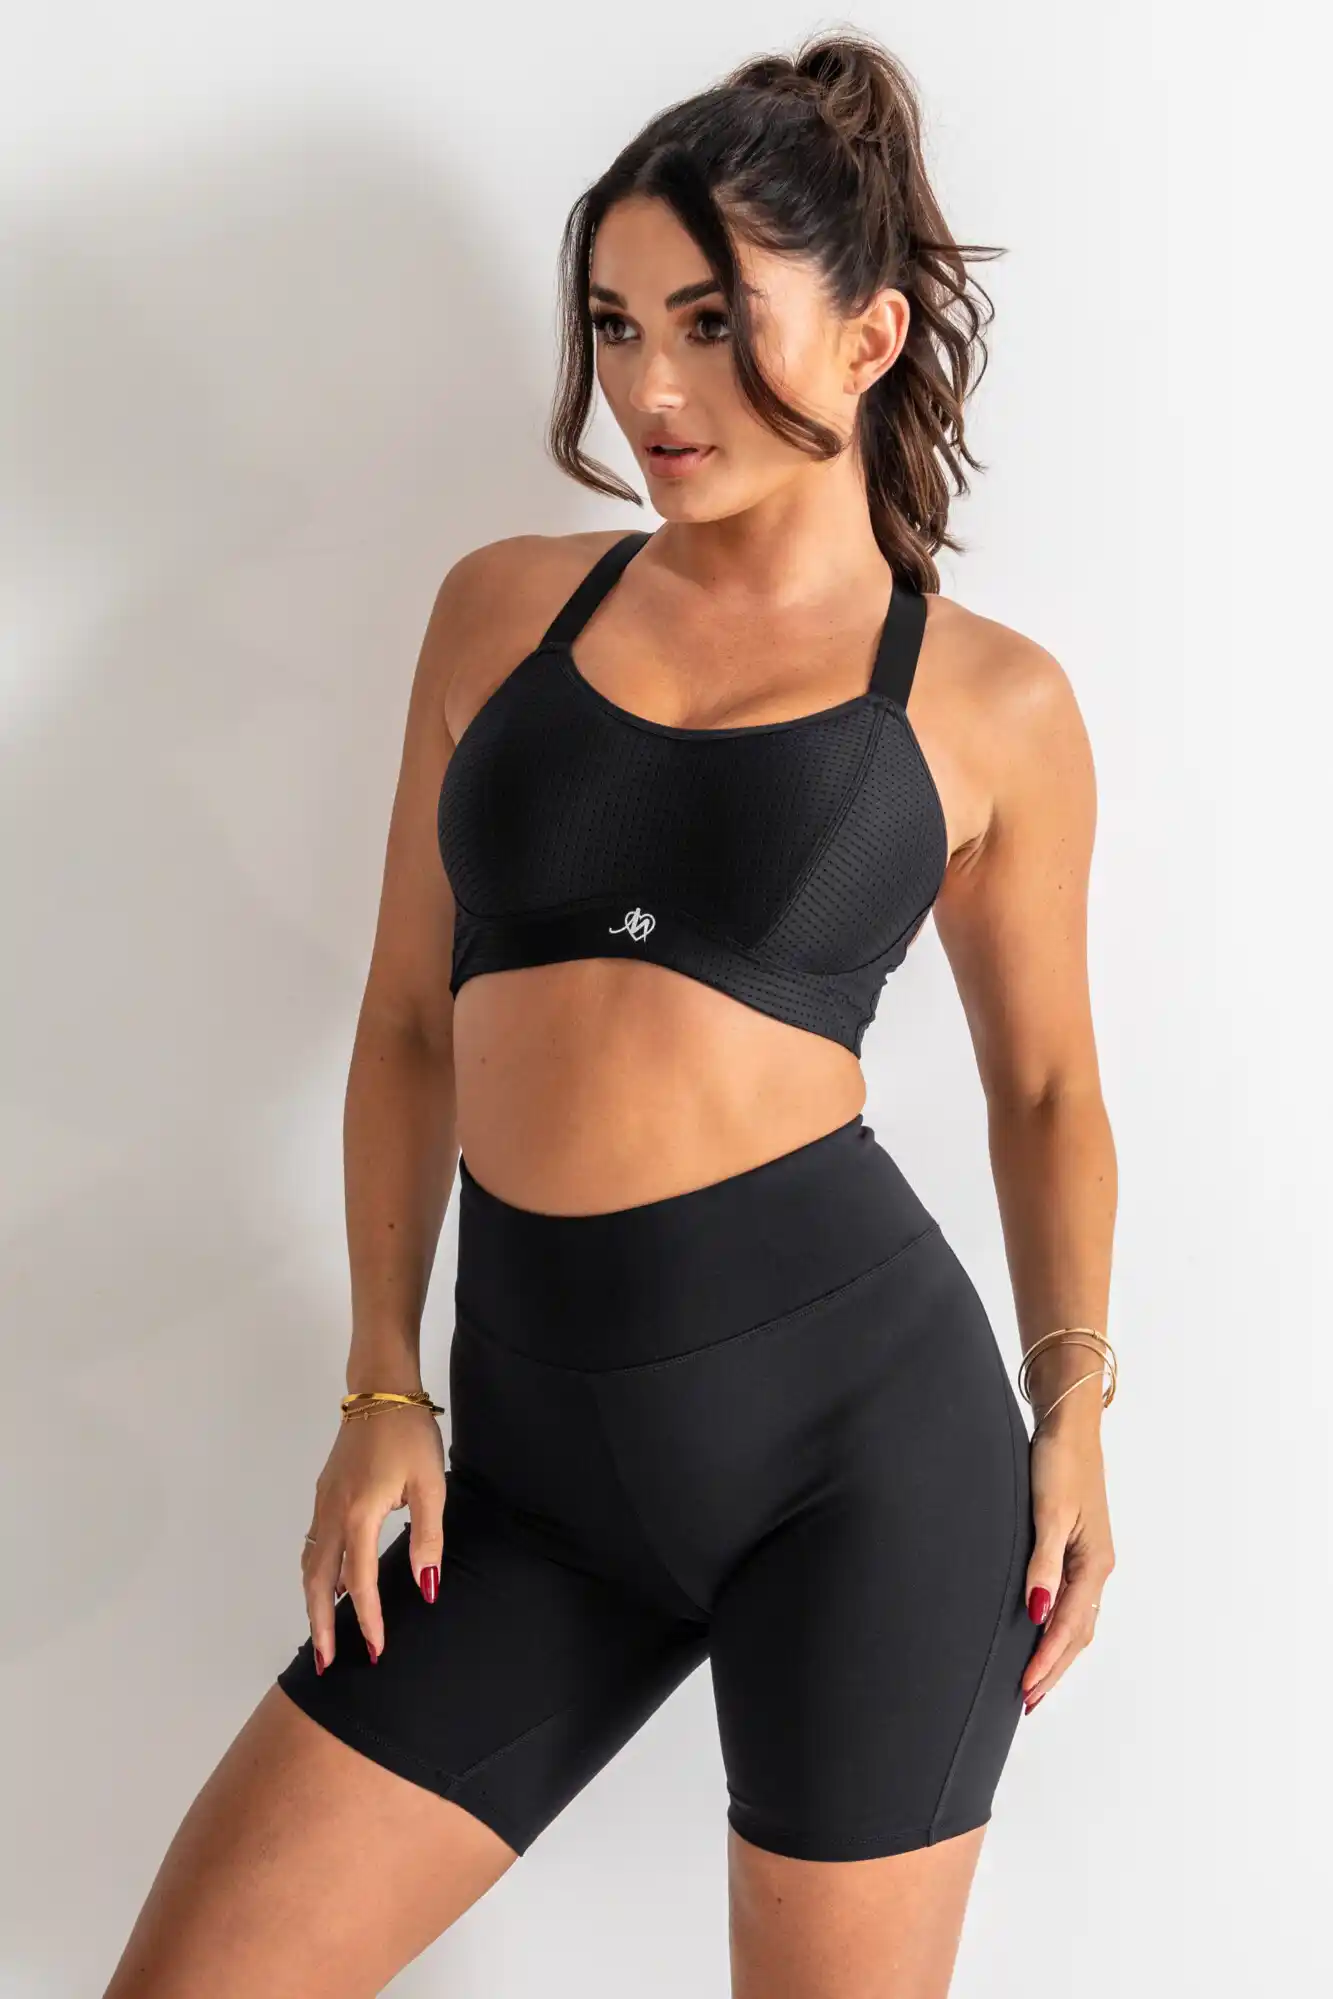 Patterned Sports Bra with 40% discount!